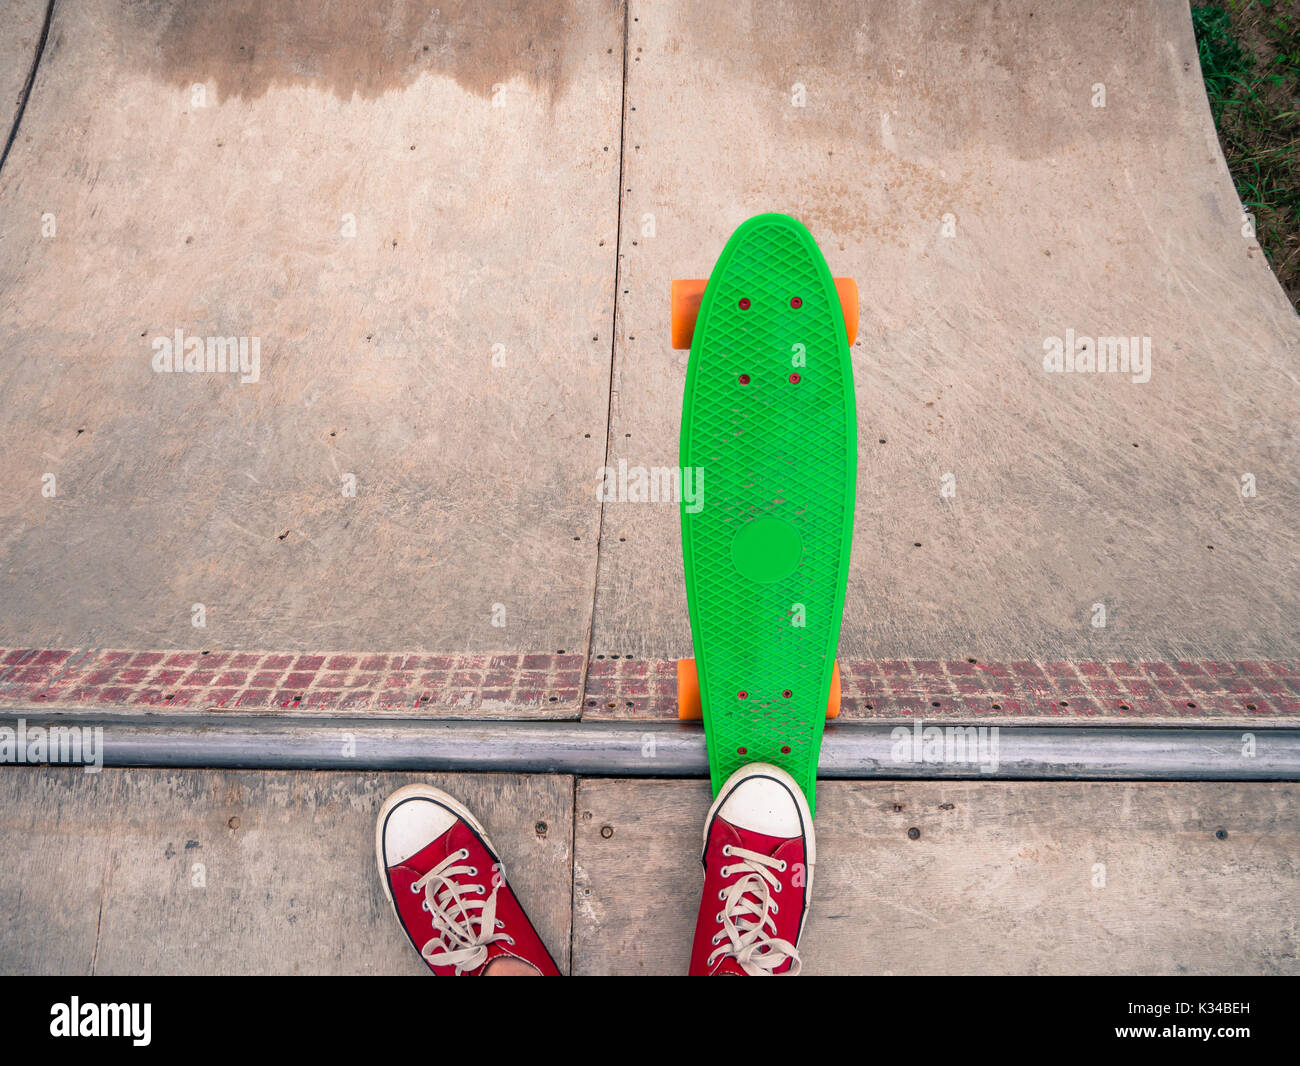 Low section of a male skater in red sneakers with a green penny board on the half-pipe. Stock Photo